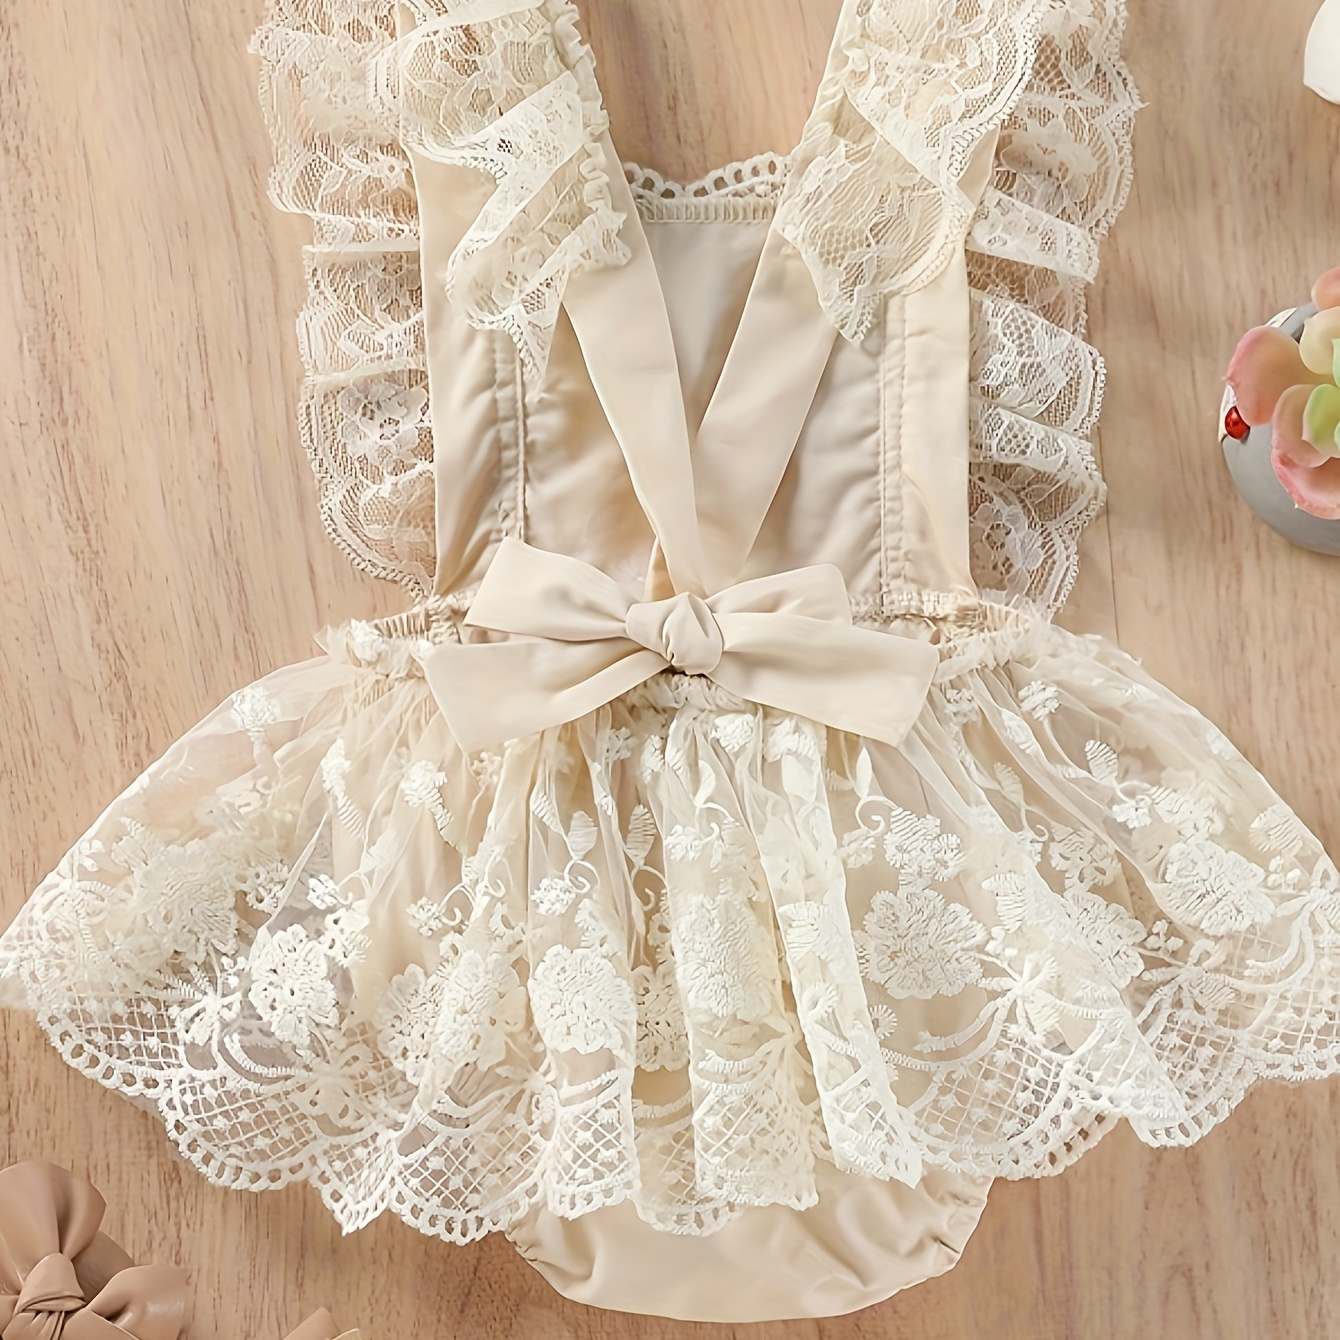 

Baby Girls Summer Romper, Plain Floral Lace Embroidery Skirt Layered Adjustable Straps One-piece, Snap Triangle-bottom Jumpsuit